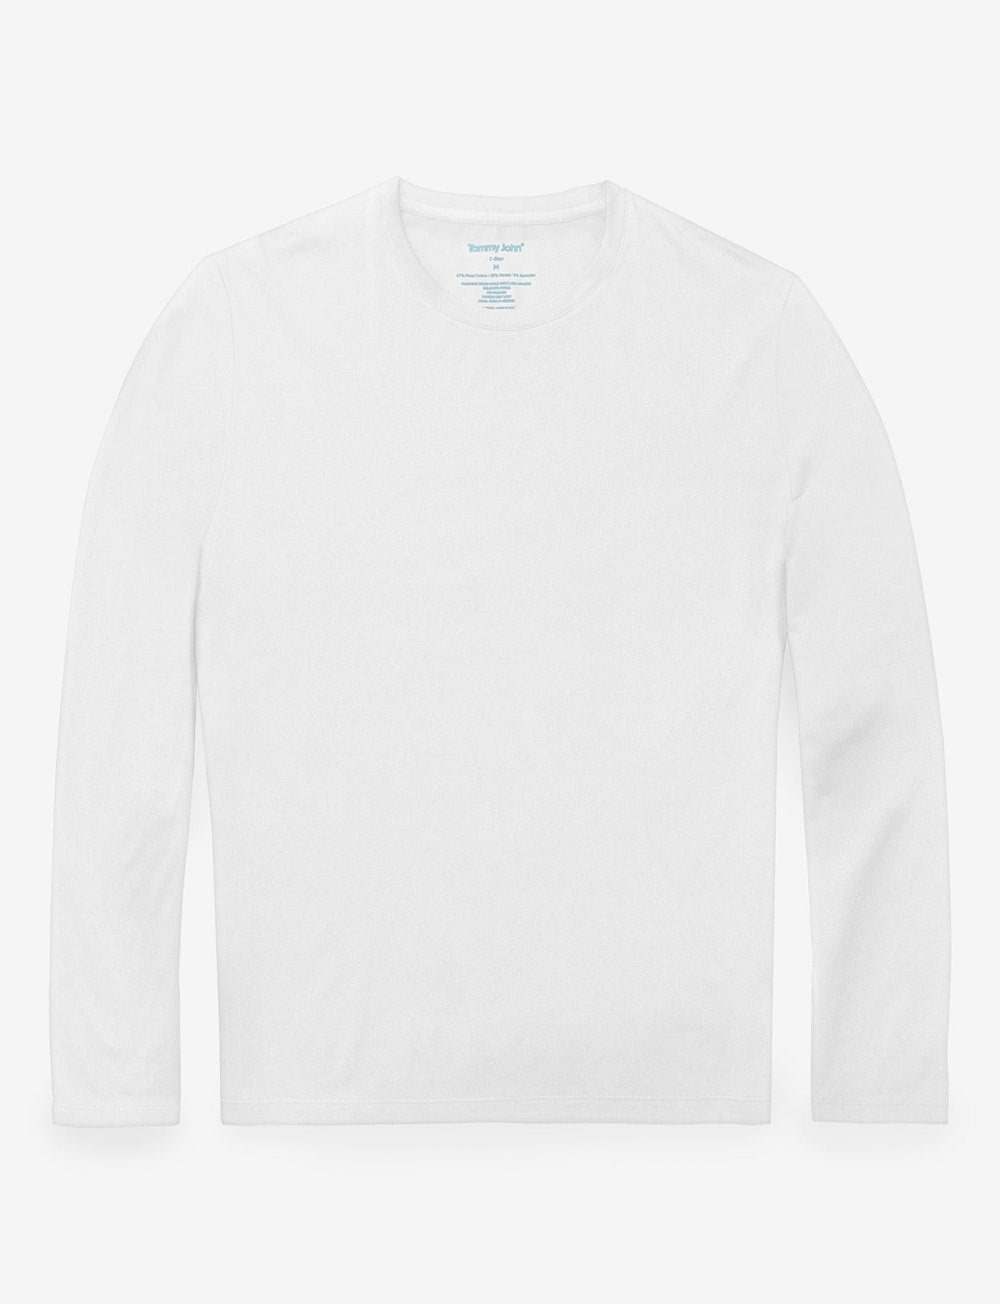 Second Skin Long Sleeve Crew Tee in White